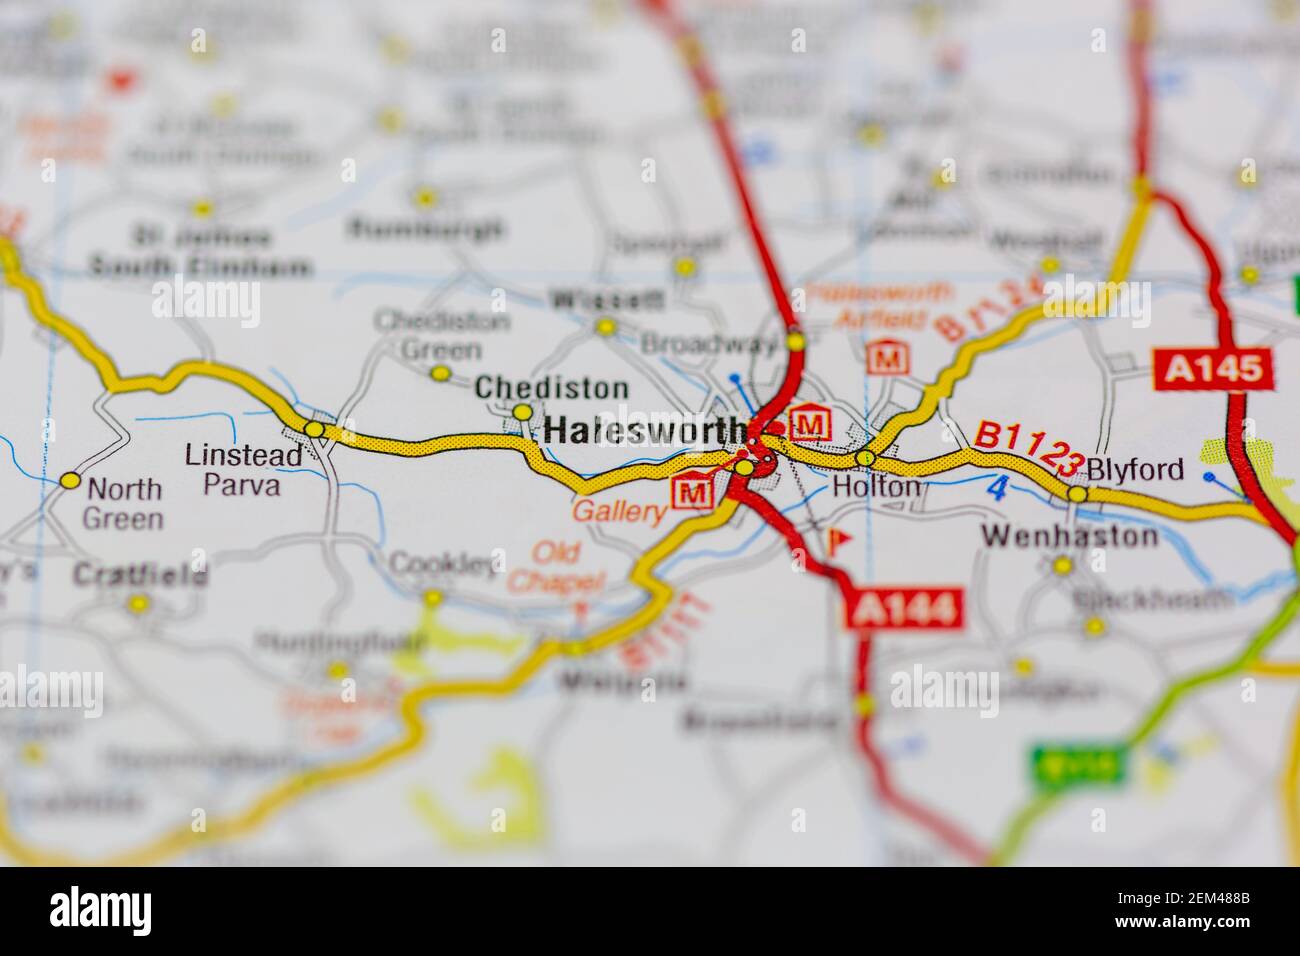 Halesworth shown on a road map or geography map Stock Photo